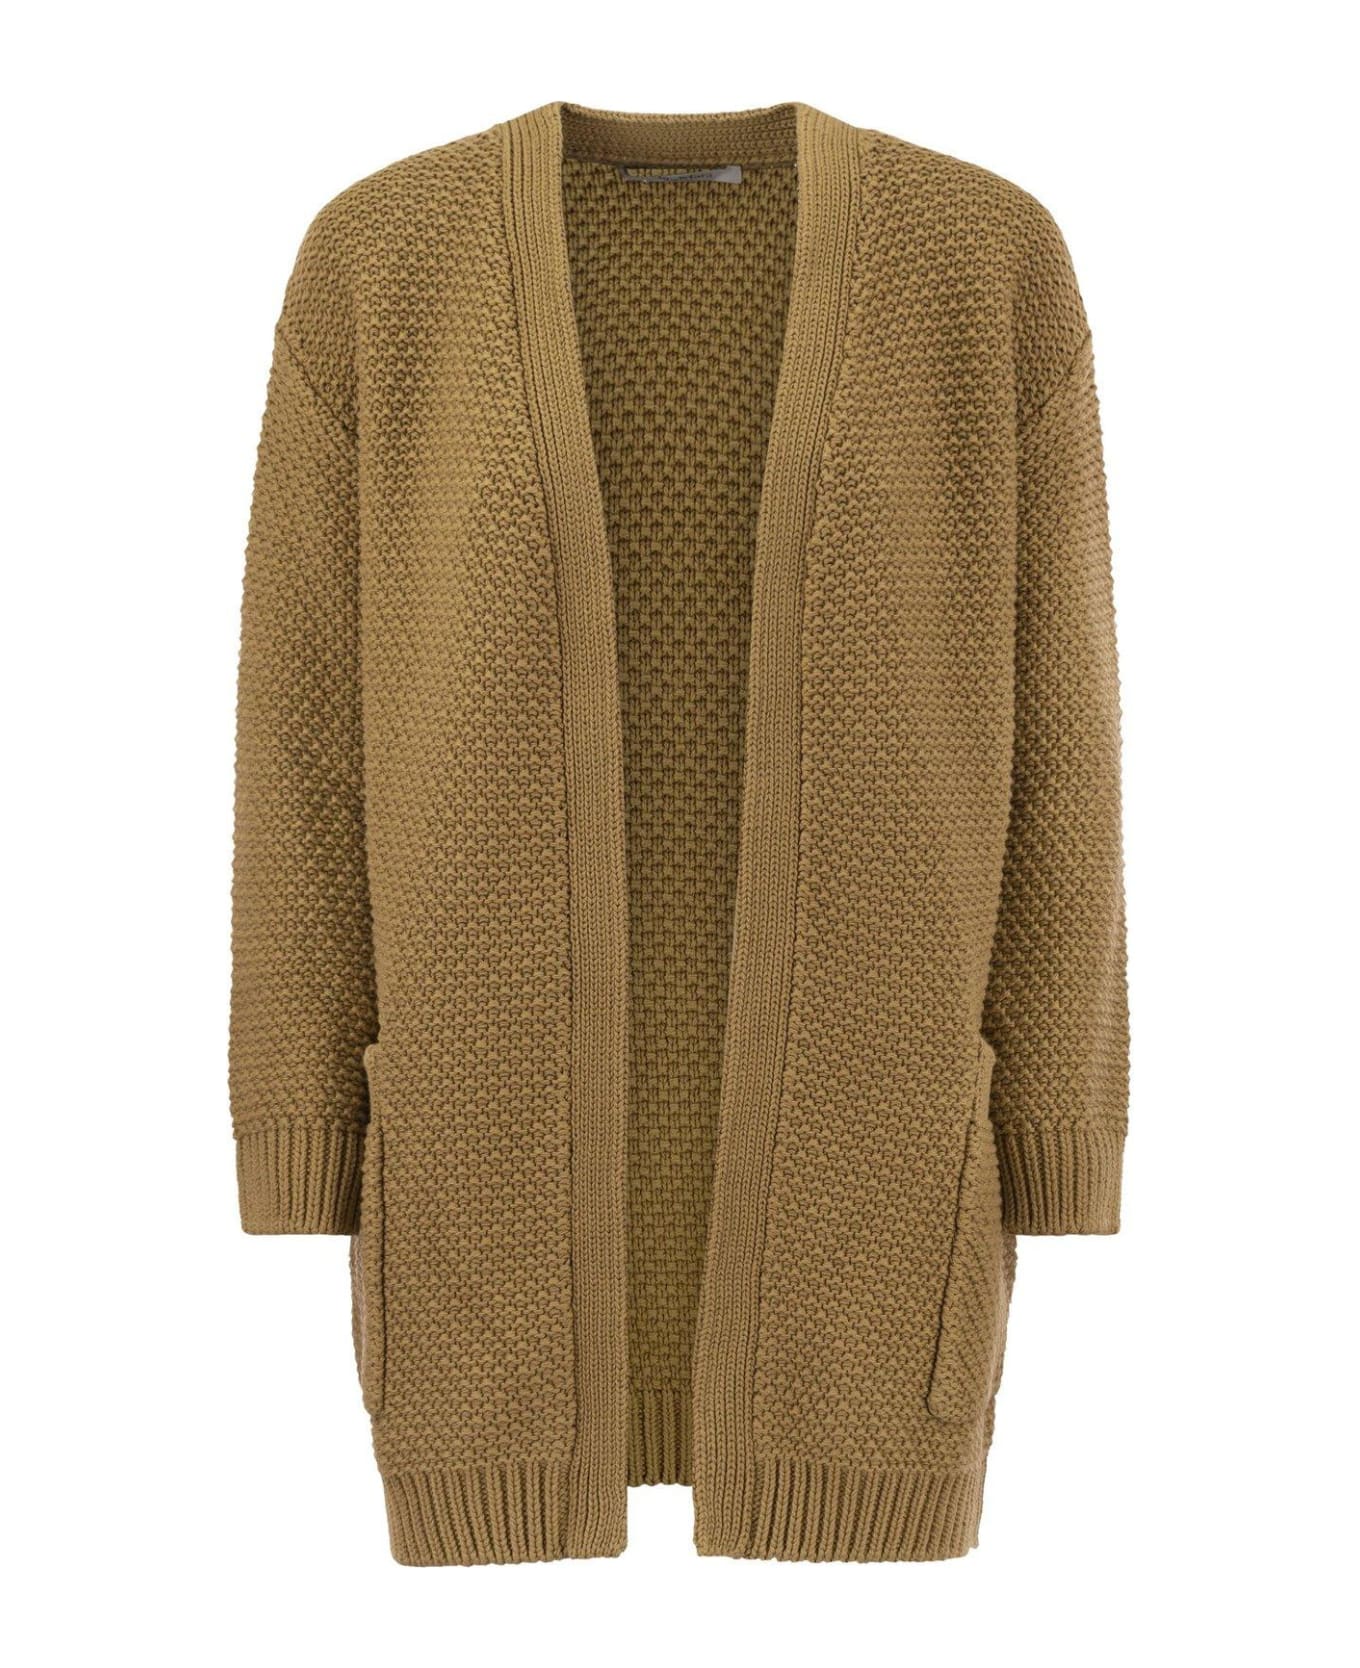 Max Mara Open-front Knit Cardigan - Leather Brown